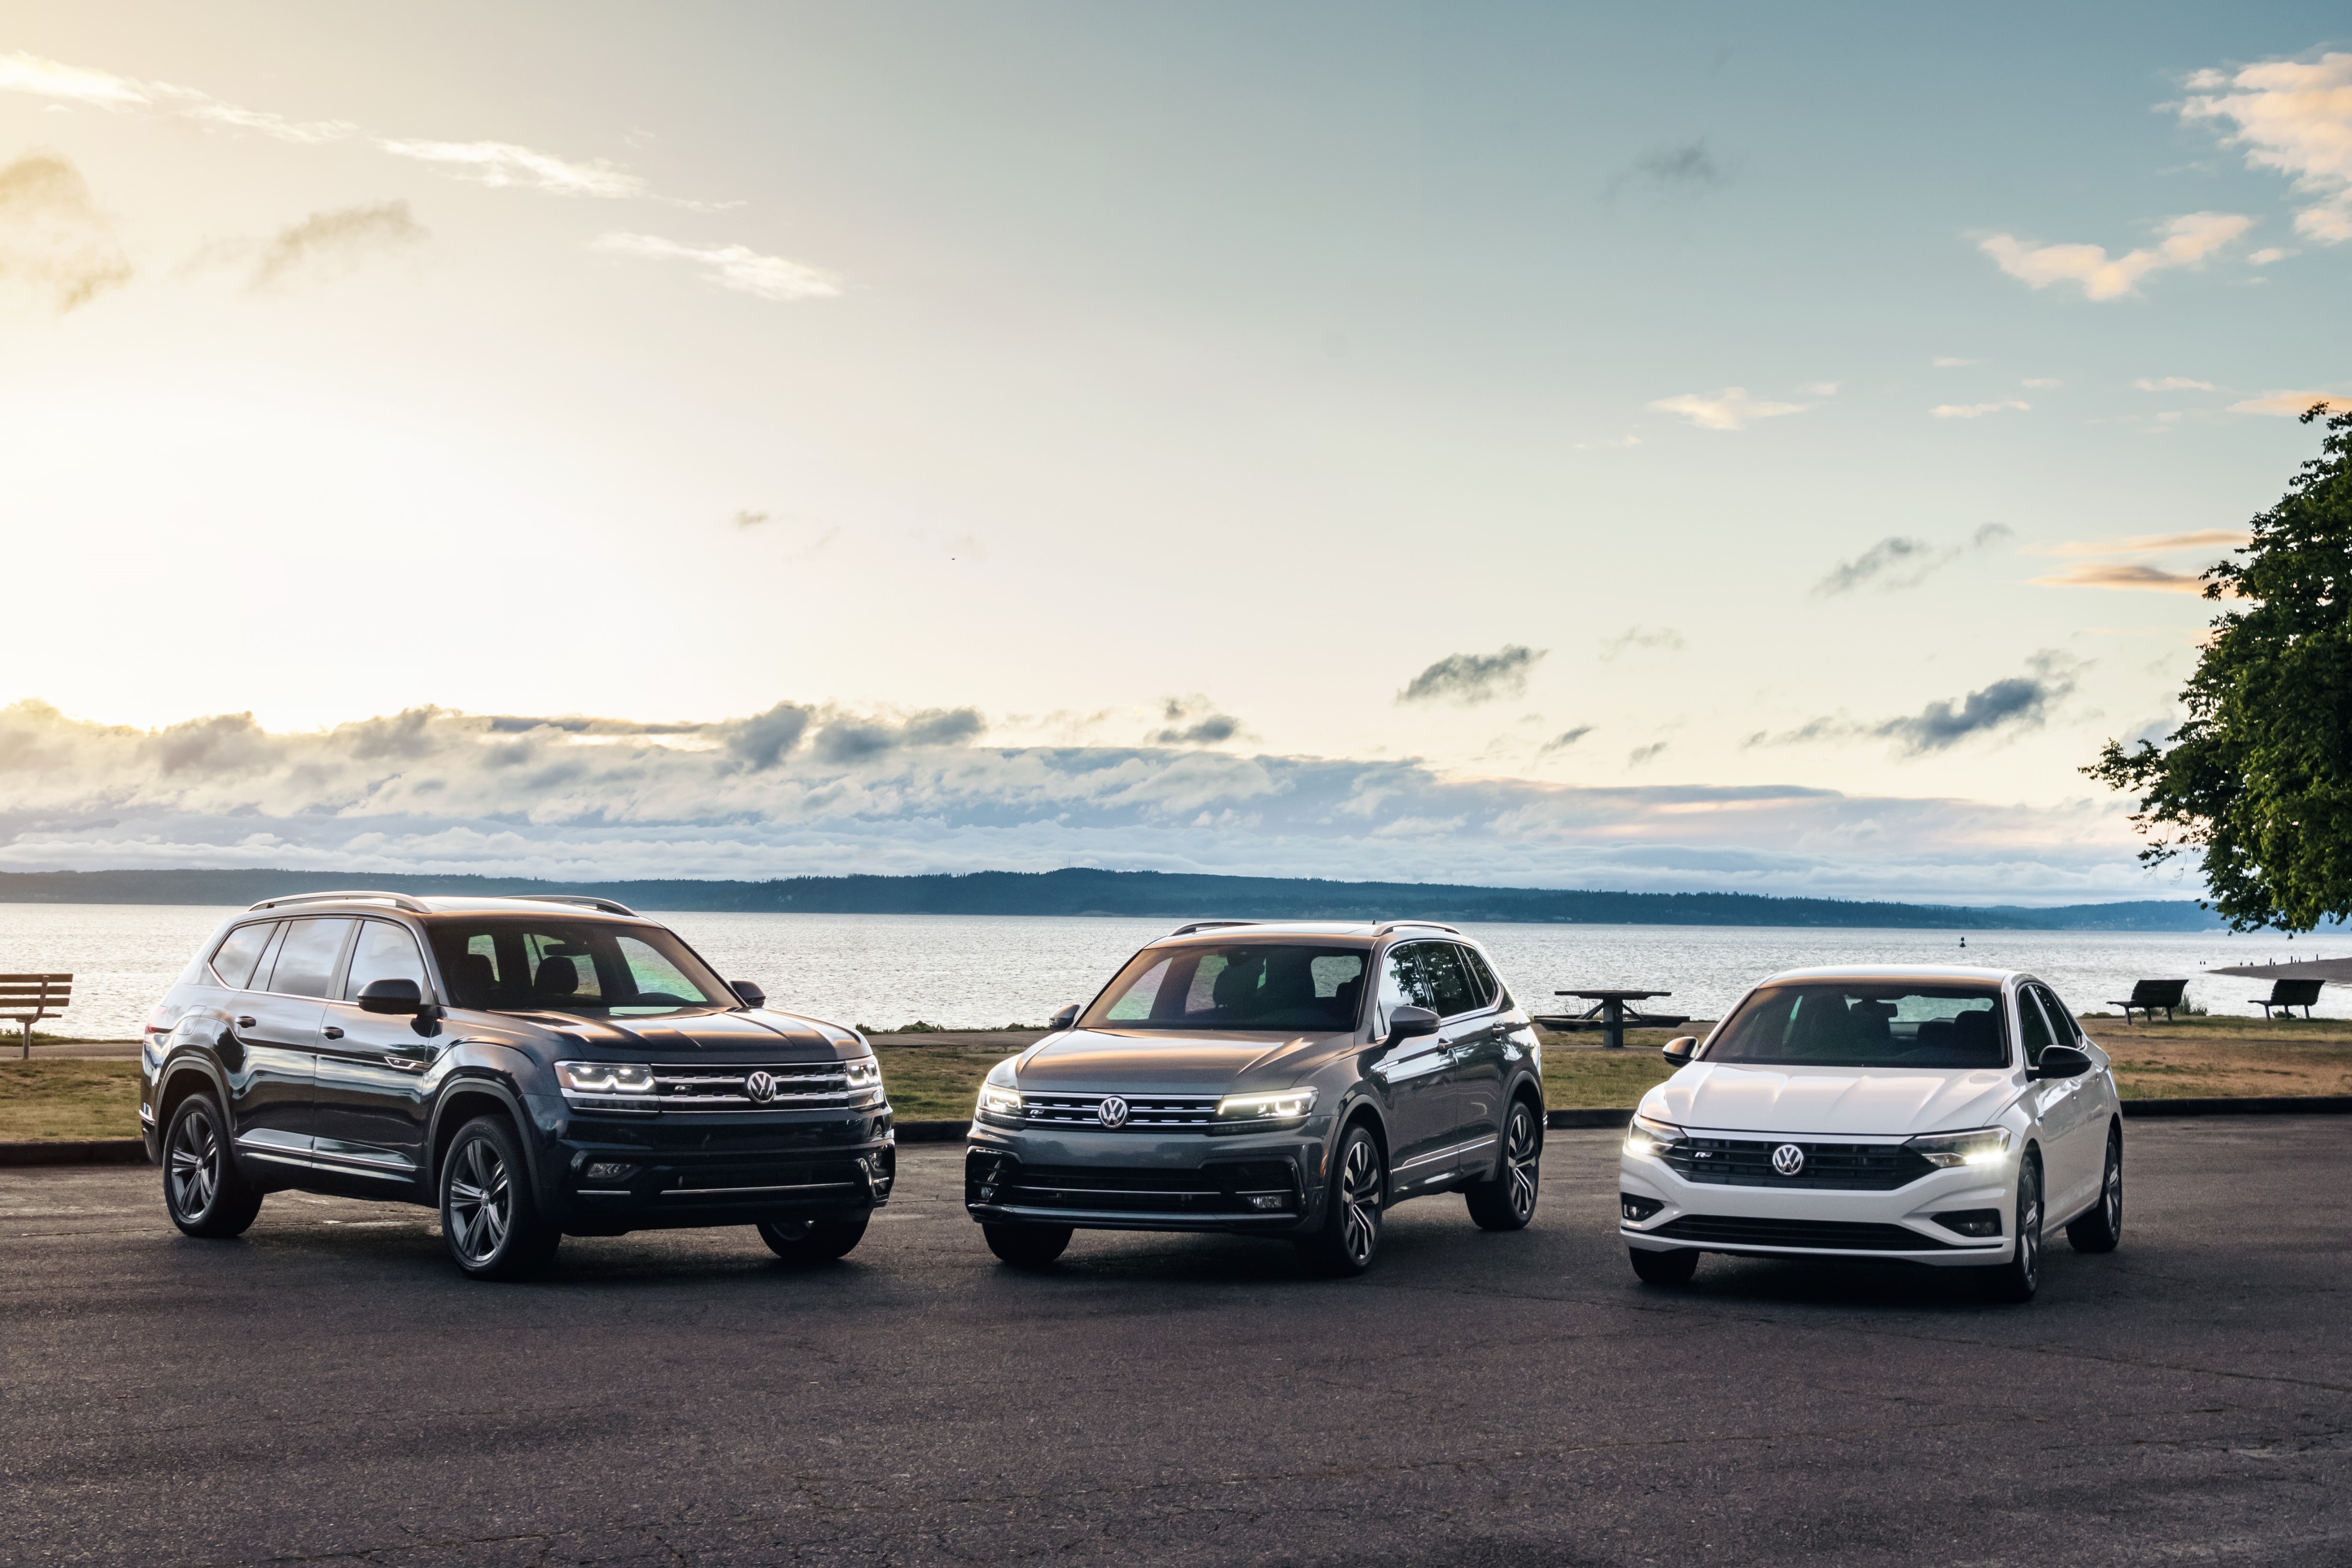 New Volkswagen cars available near Minot, ND at Bismarck Motor Company